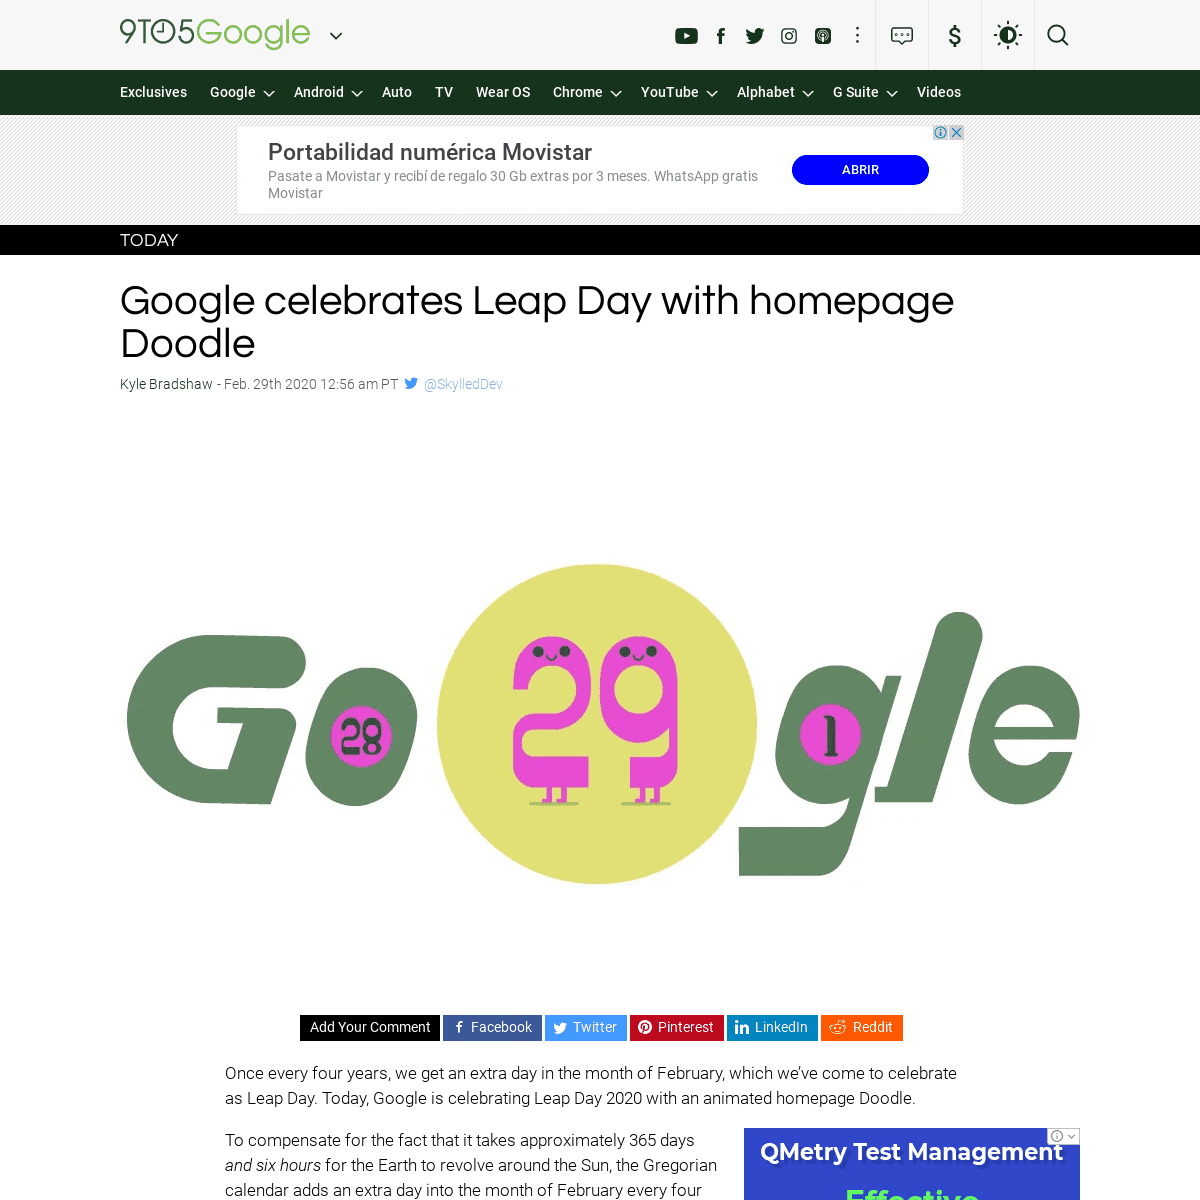 Google celebrates Leap Day with homepage Doodle - 9to5Google